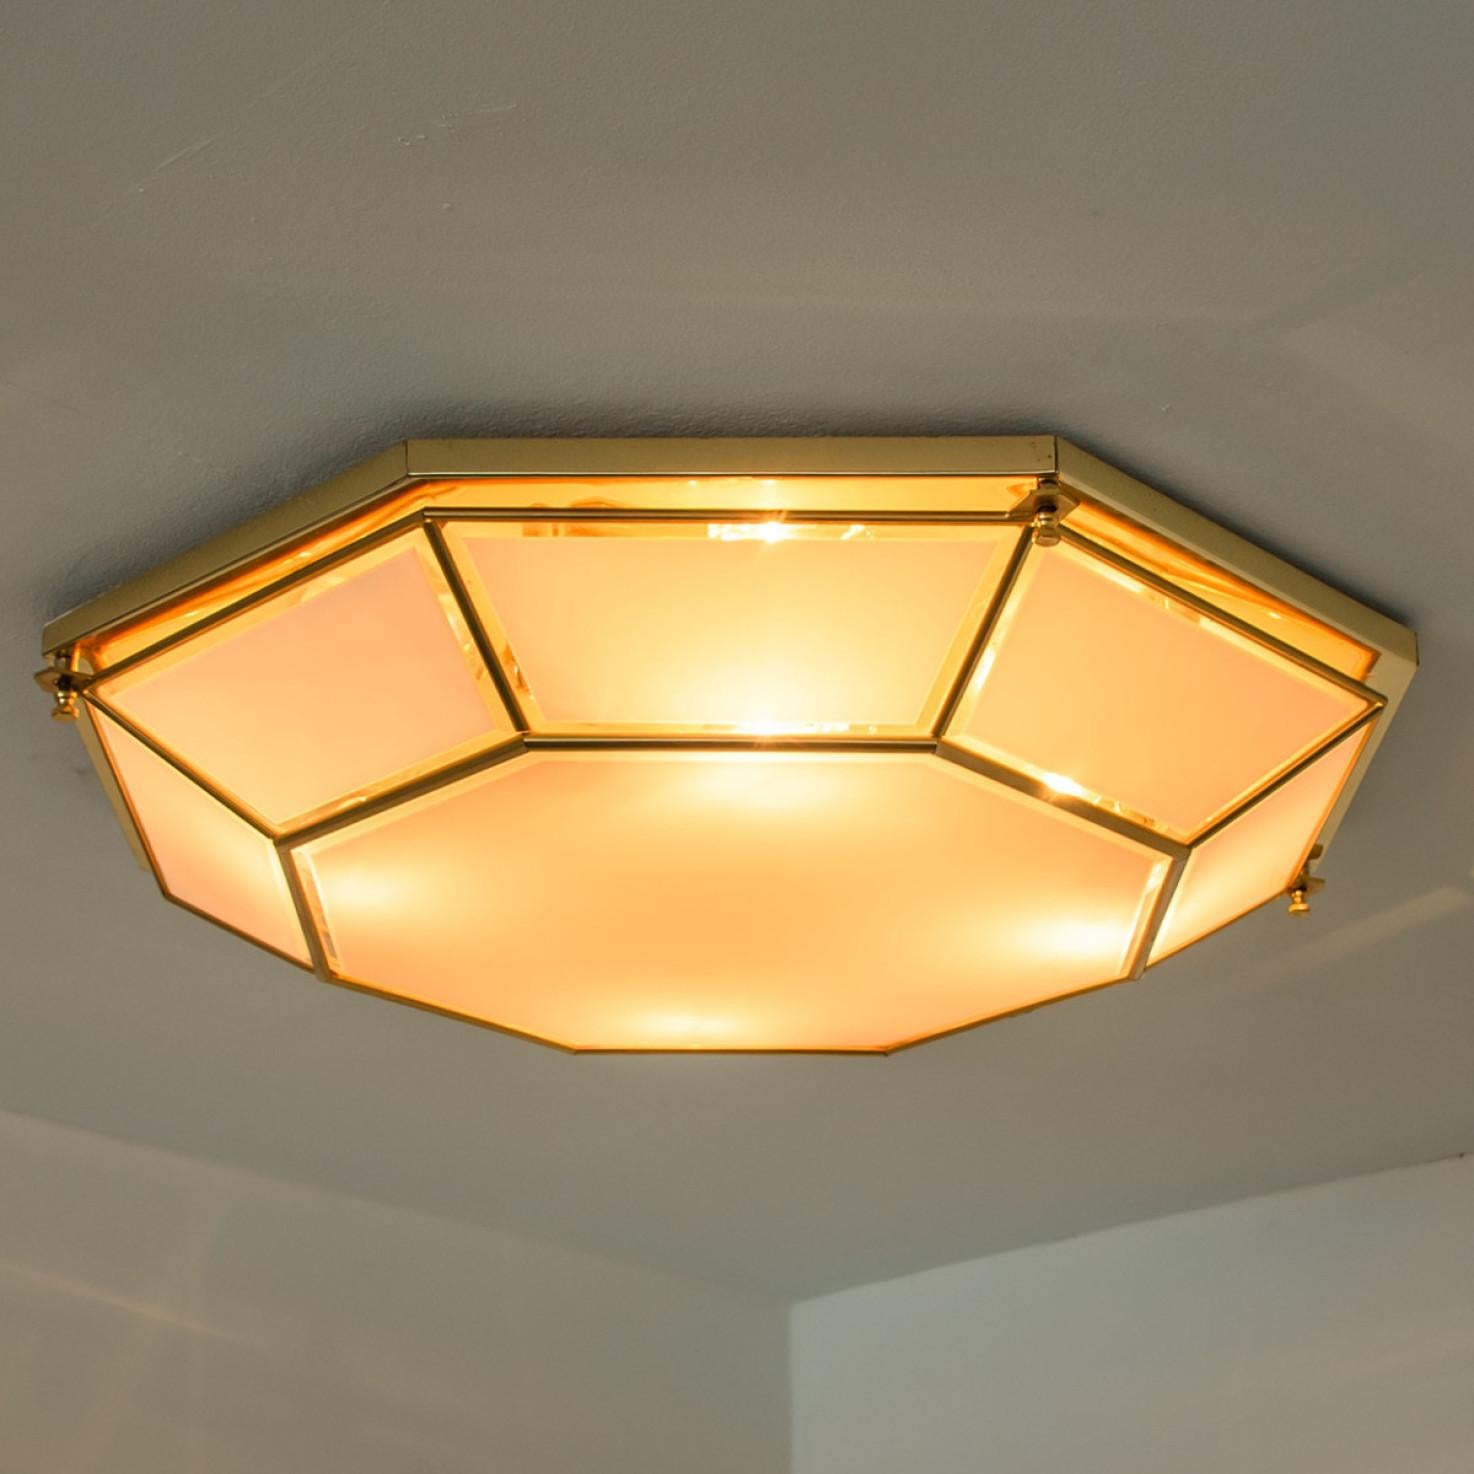 Large Octagonal Brass and White Glass Lights, Germany, 1970s For Sale 2